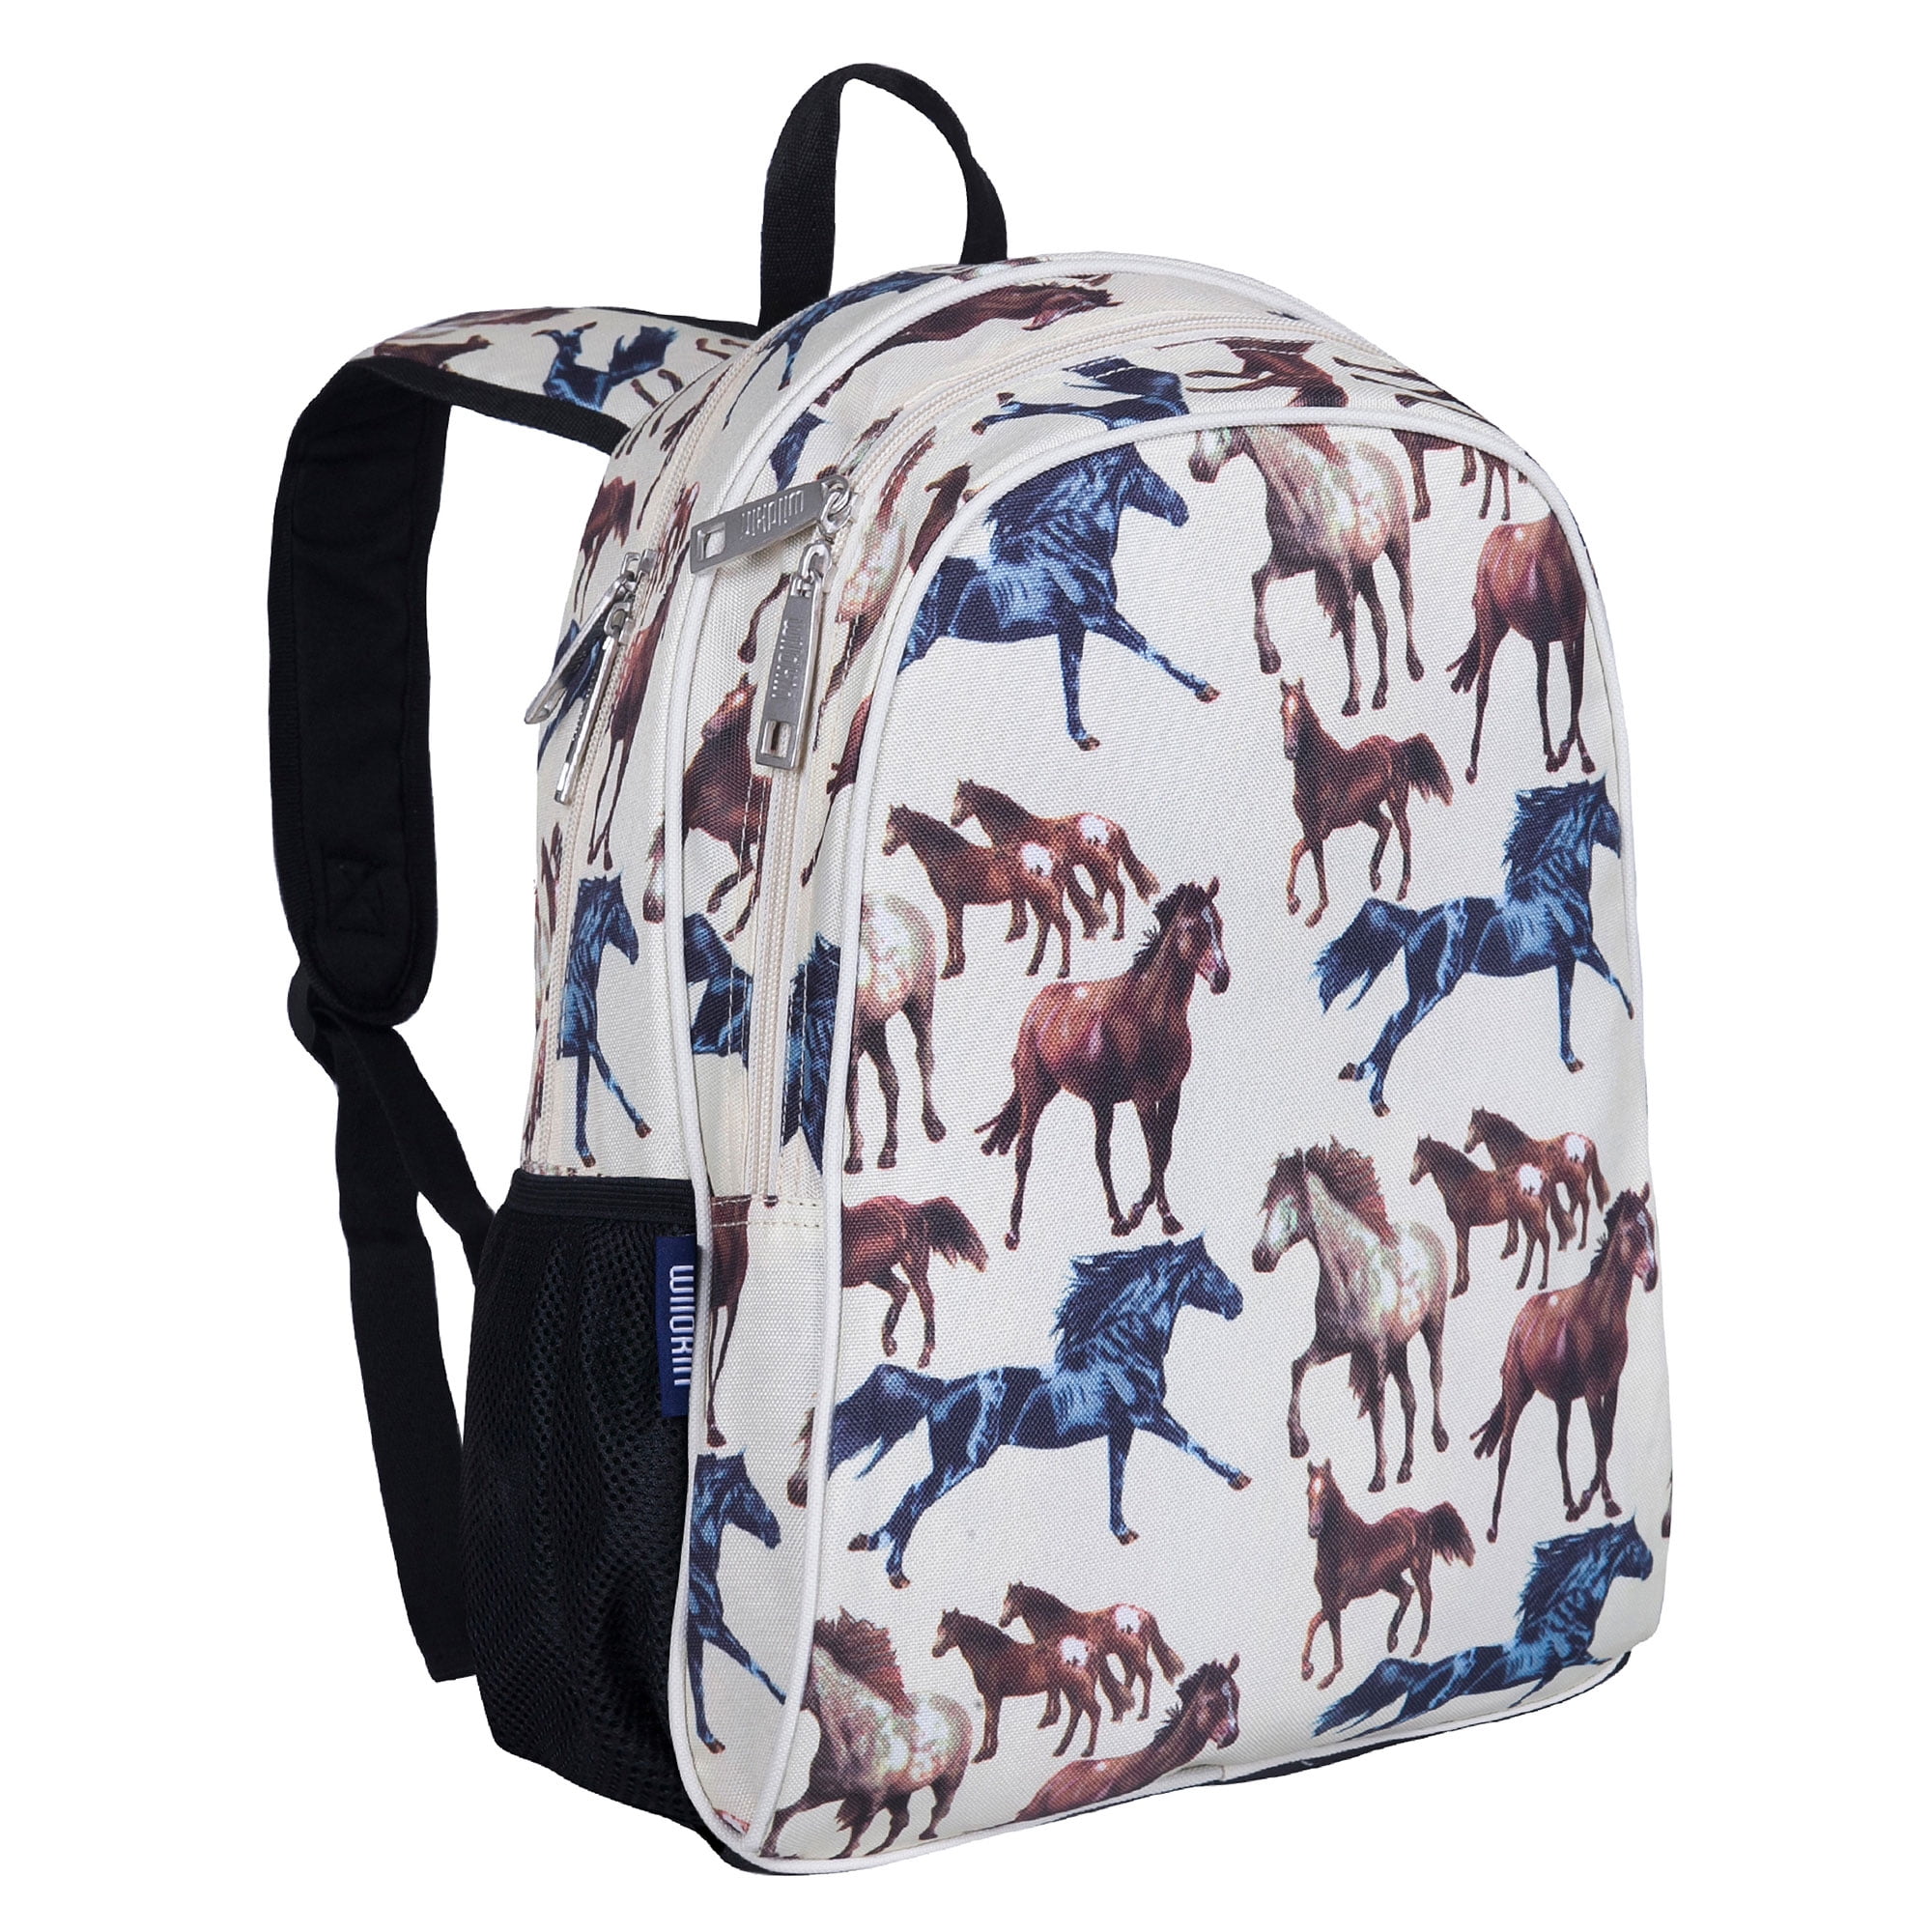 NEW Wildkin Horse Dreams 16 Inch Backpack FREE SHIPPING